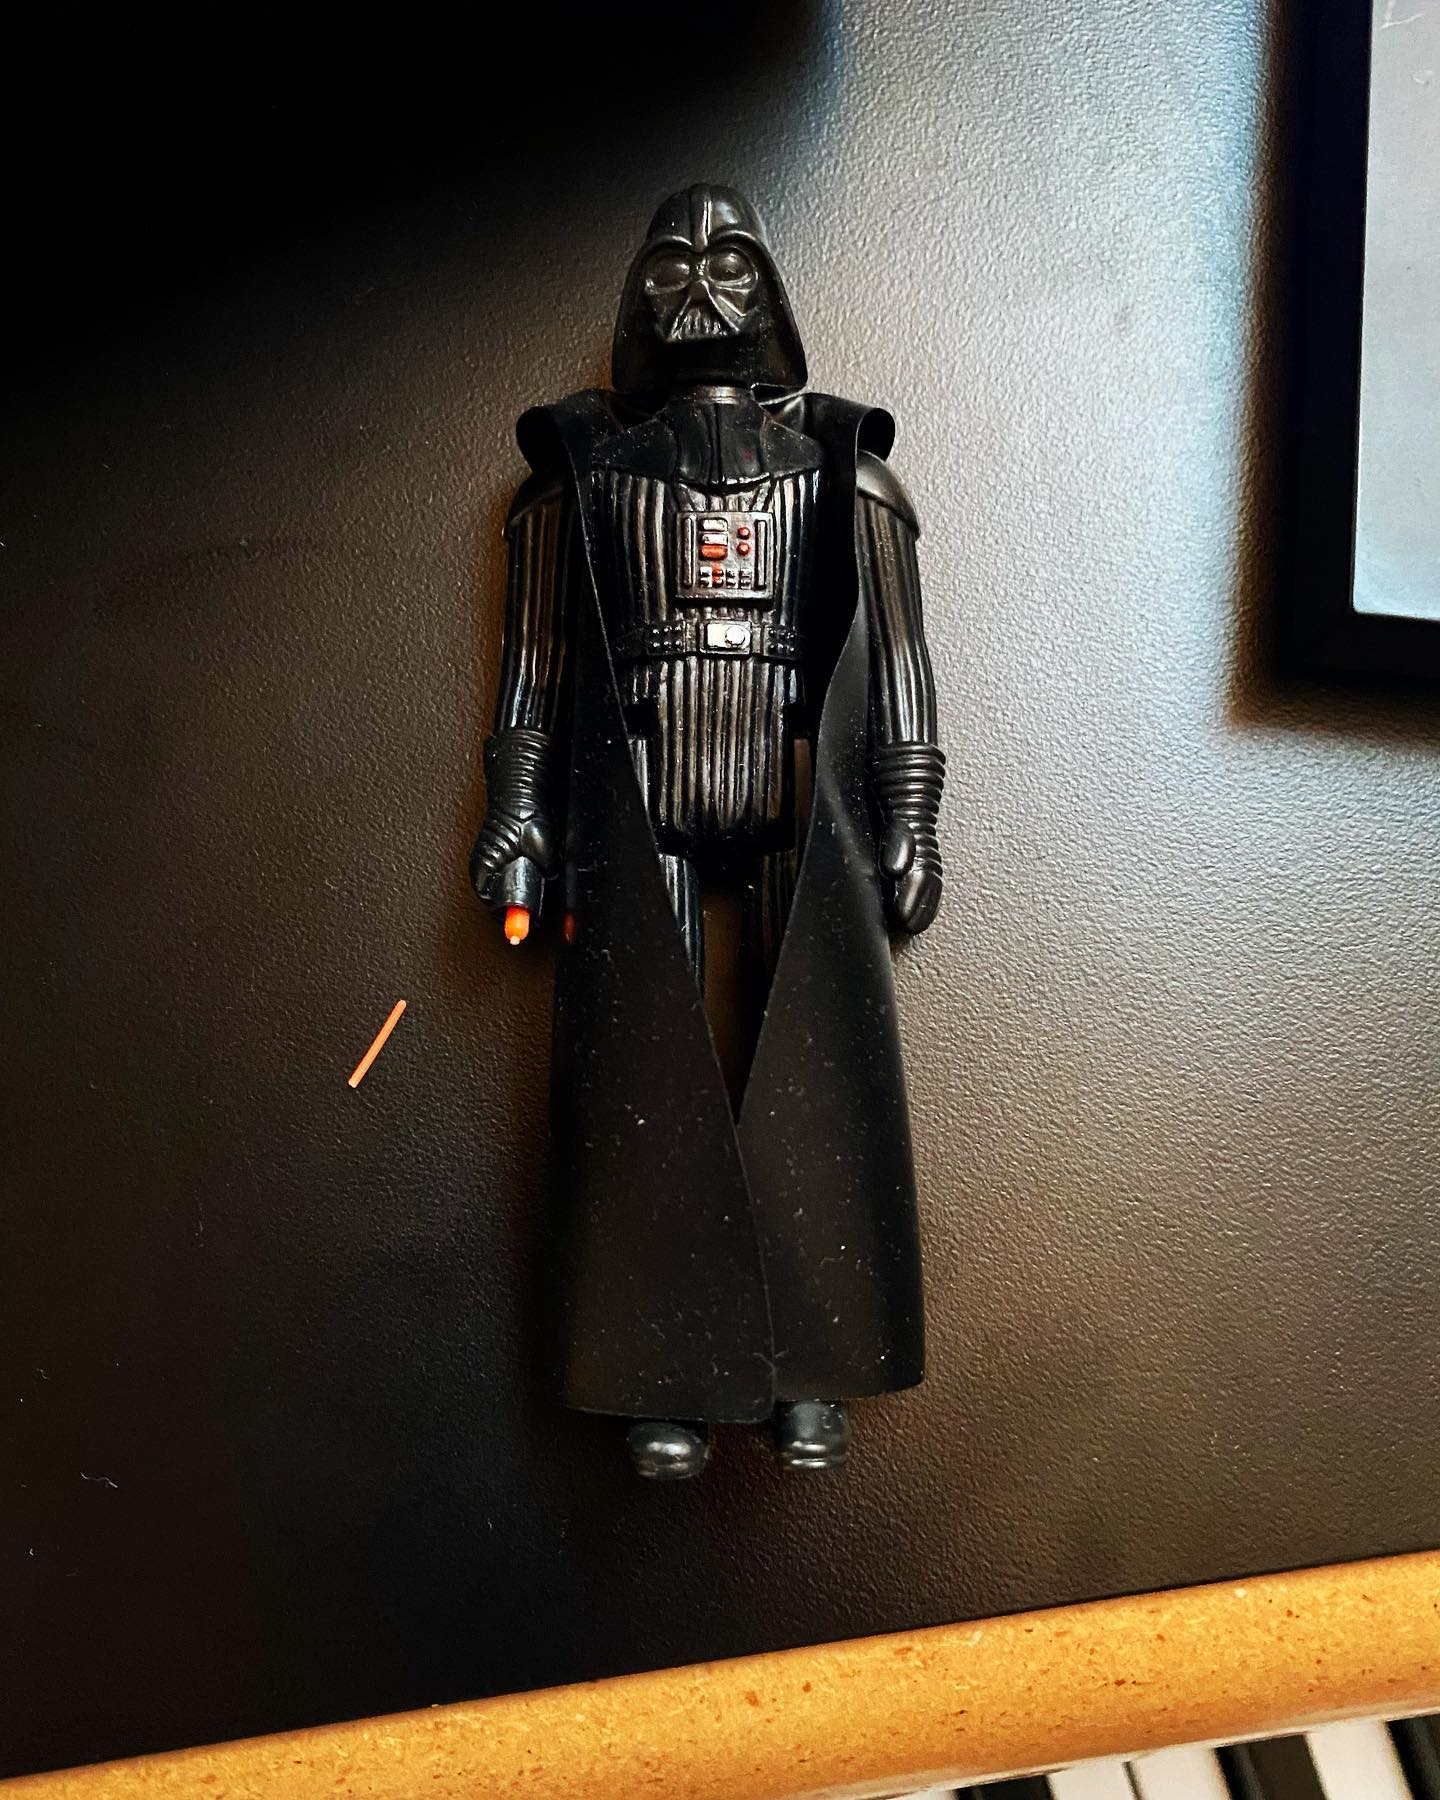 I have a mint Darth Vader action figure on my desk. Correction. I used to have a mint Darth Vader action figure on my desk. RIP David Prowse